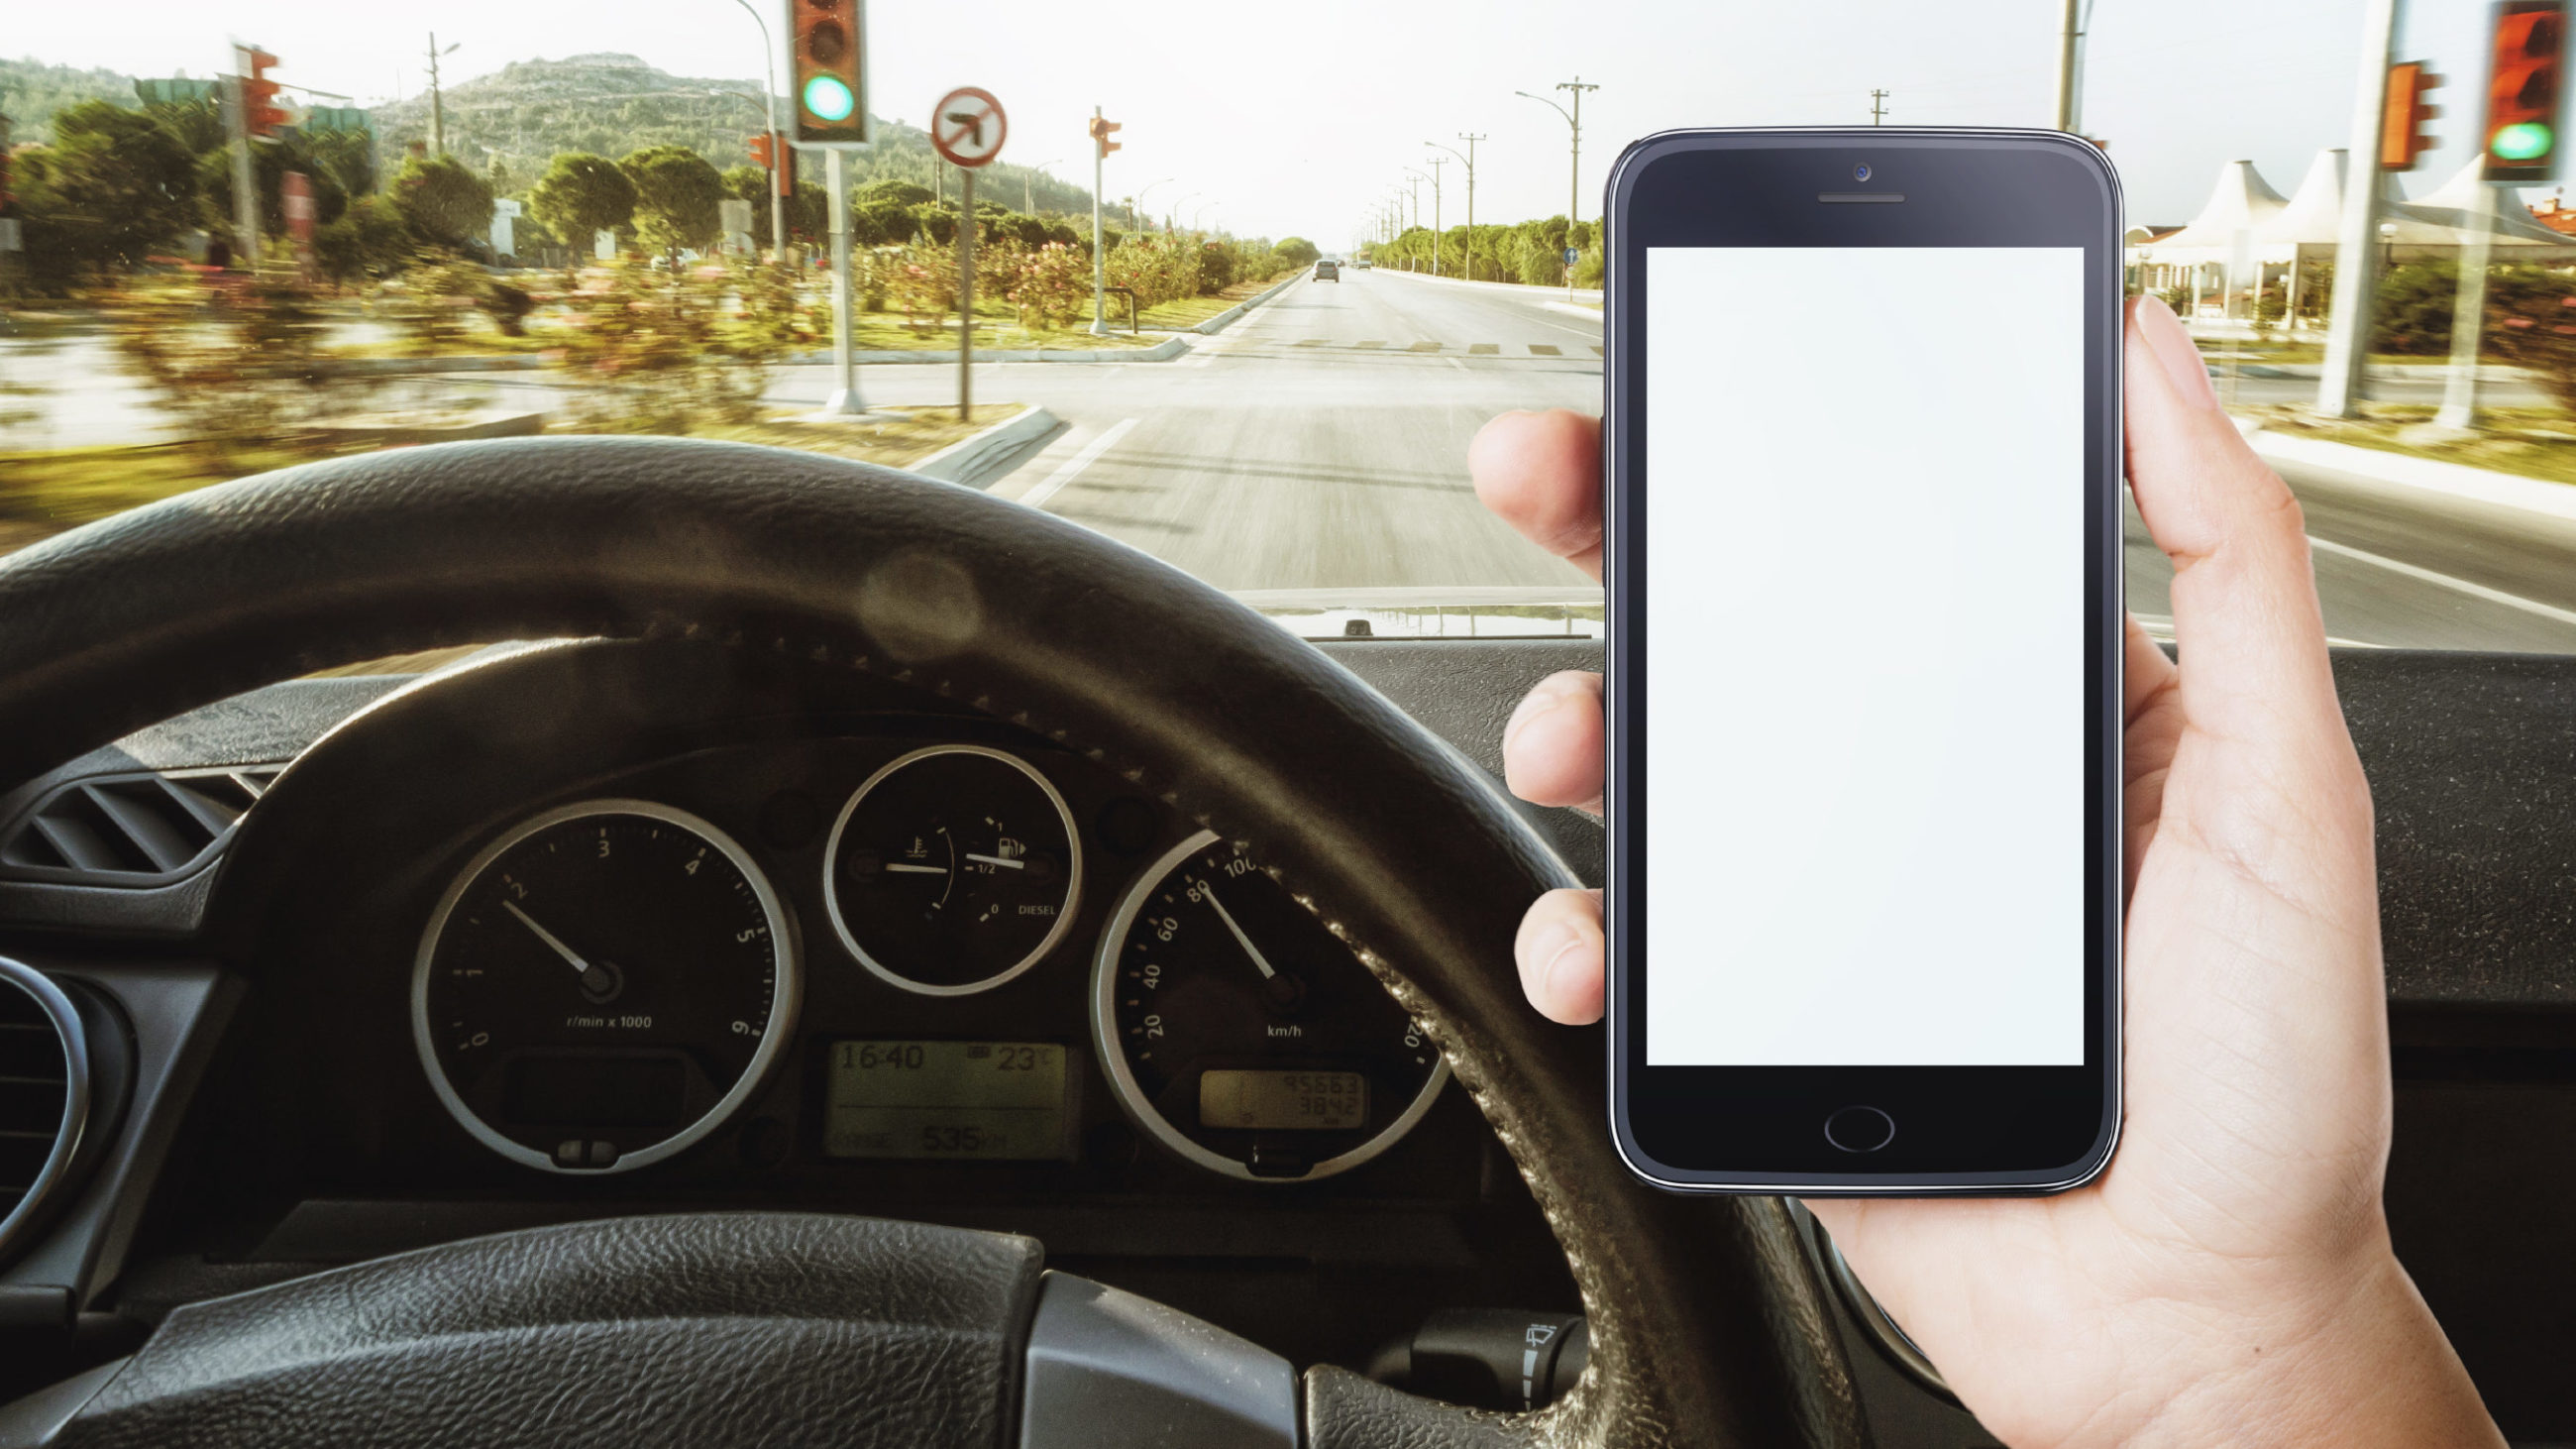 To cut down on distracted driving, a new roadside test called the Textalyzer could allow police to scan drivers phones after a crash to check for recent activity.